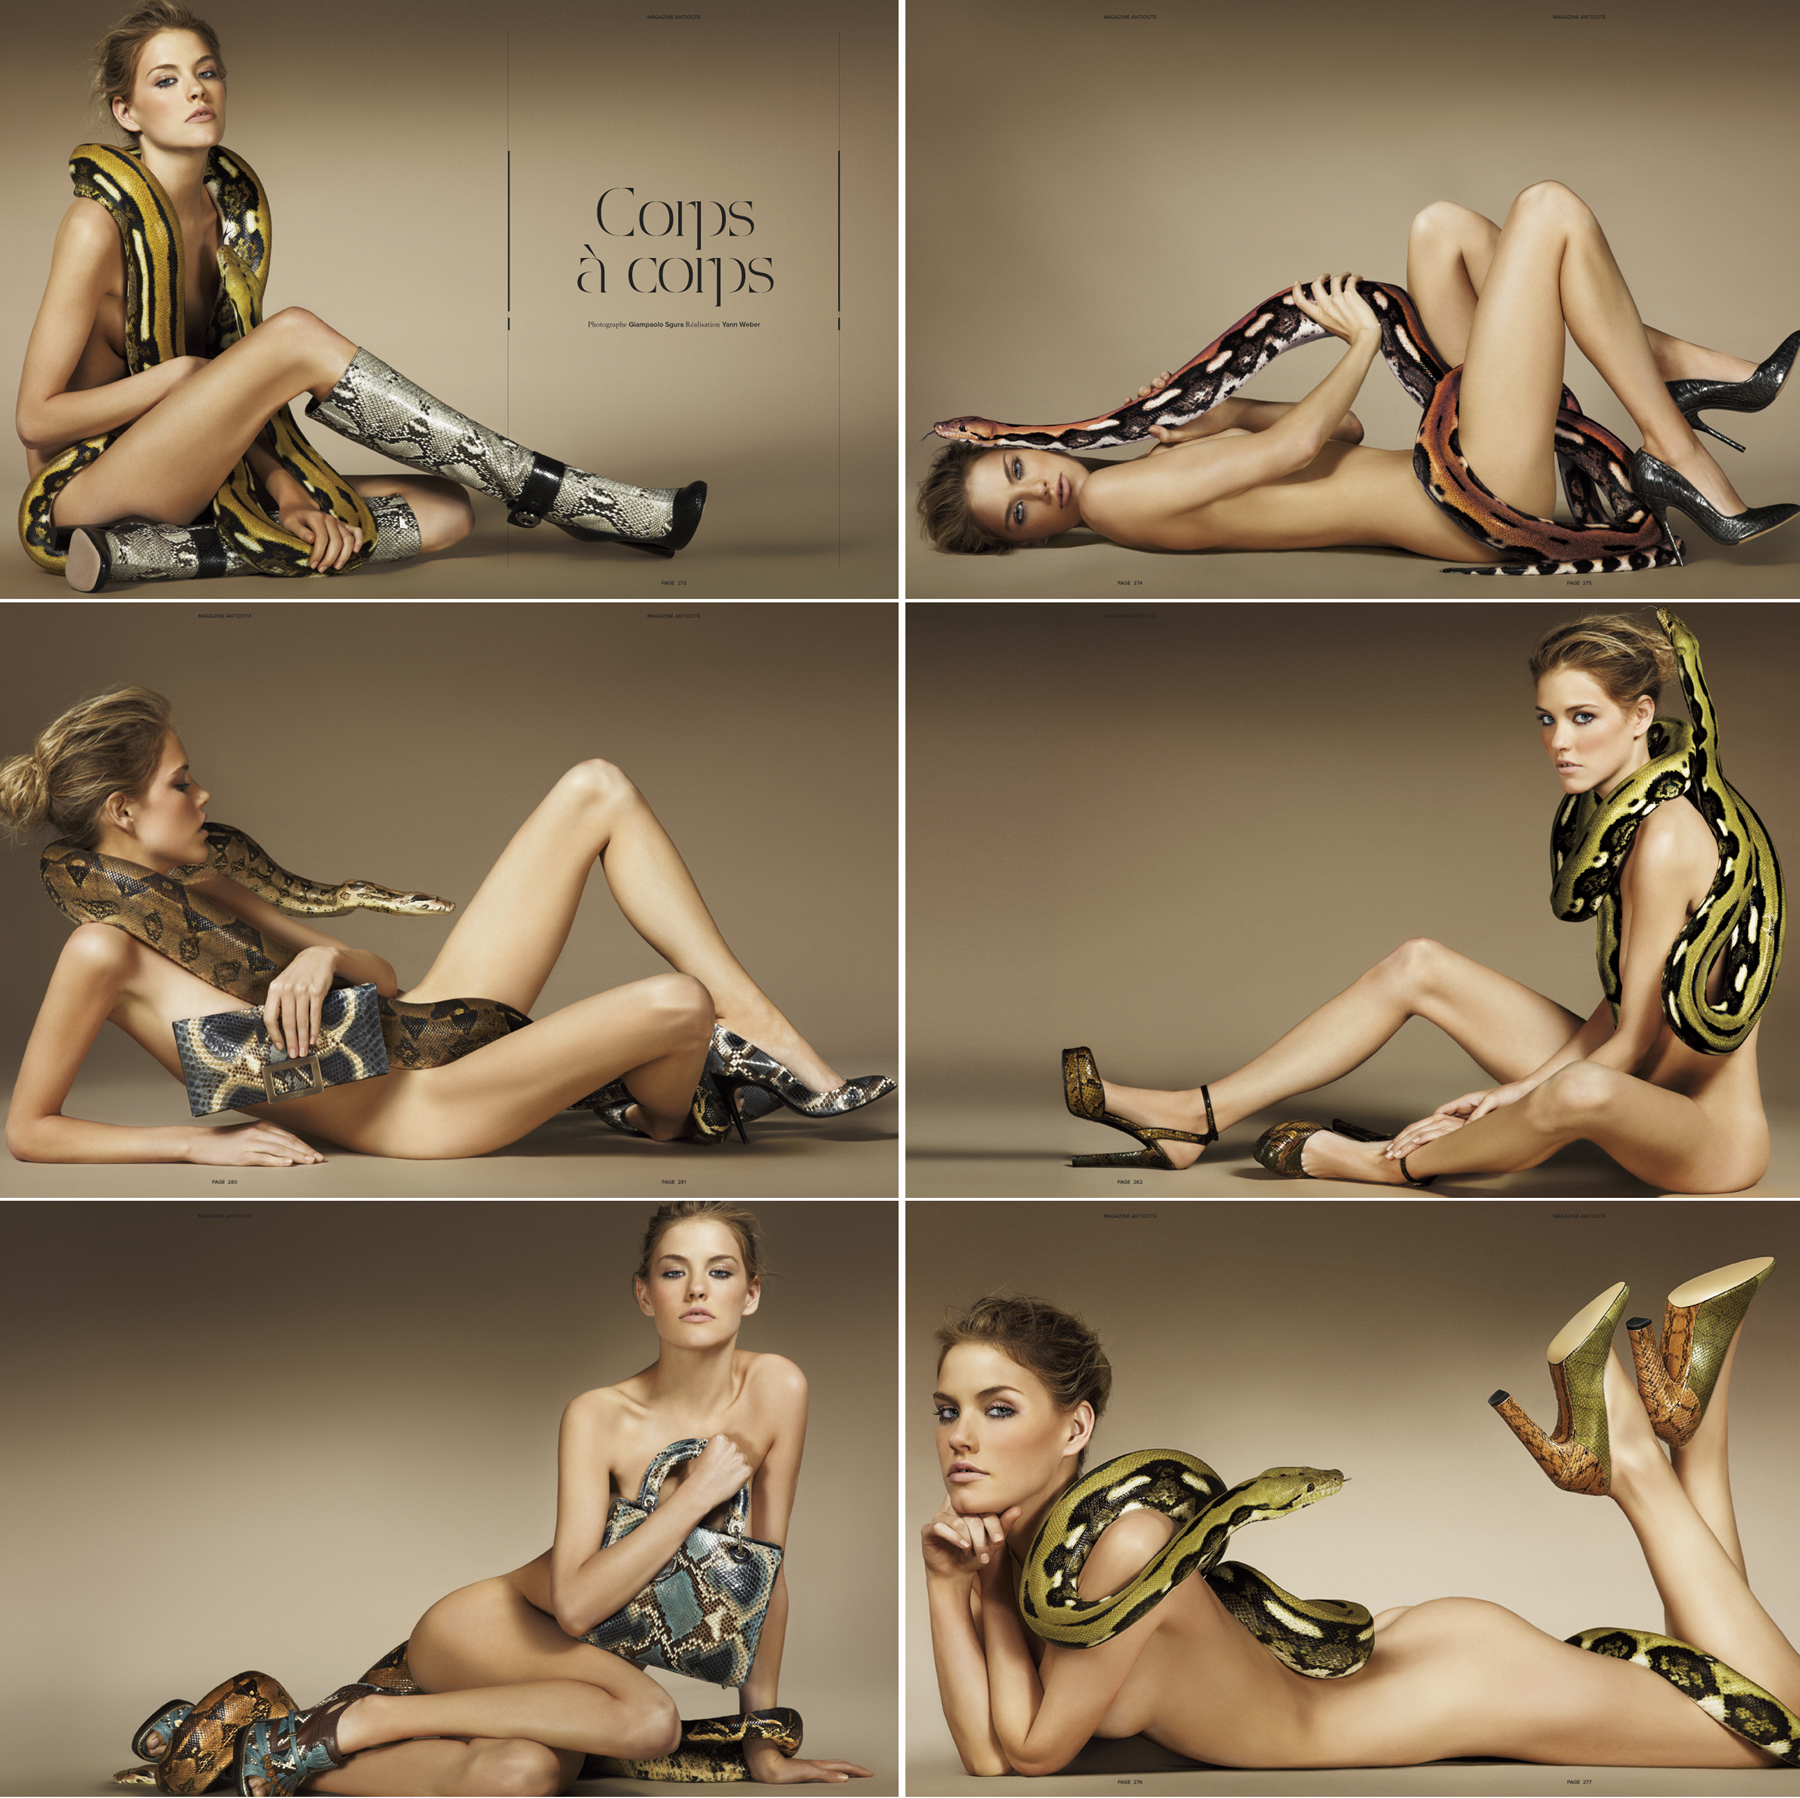 chris columbia add photo naked girls with snakes